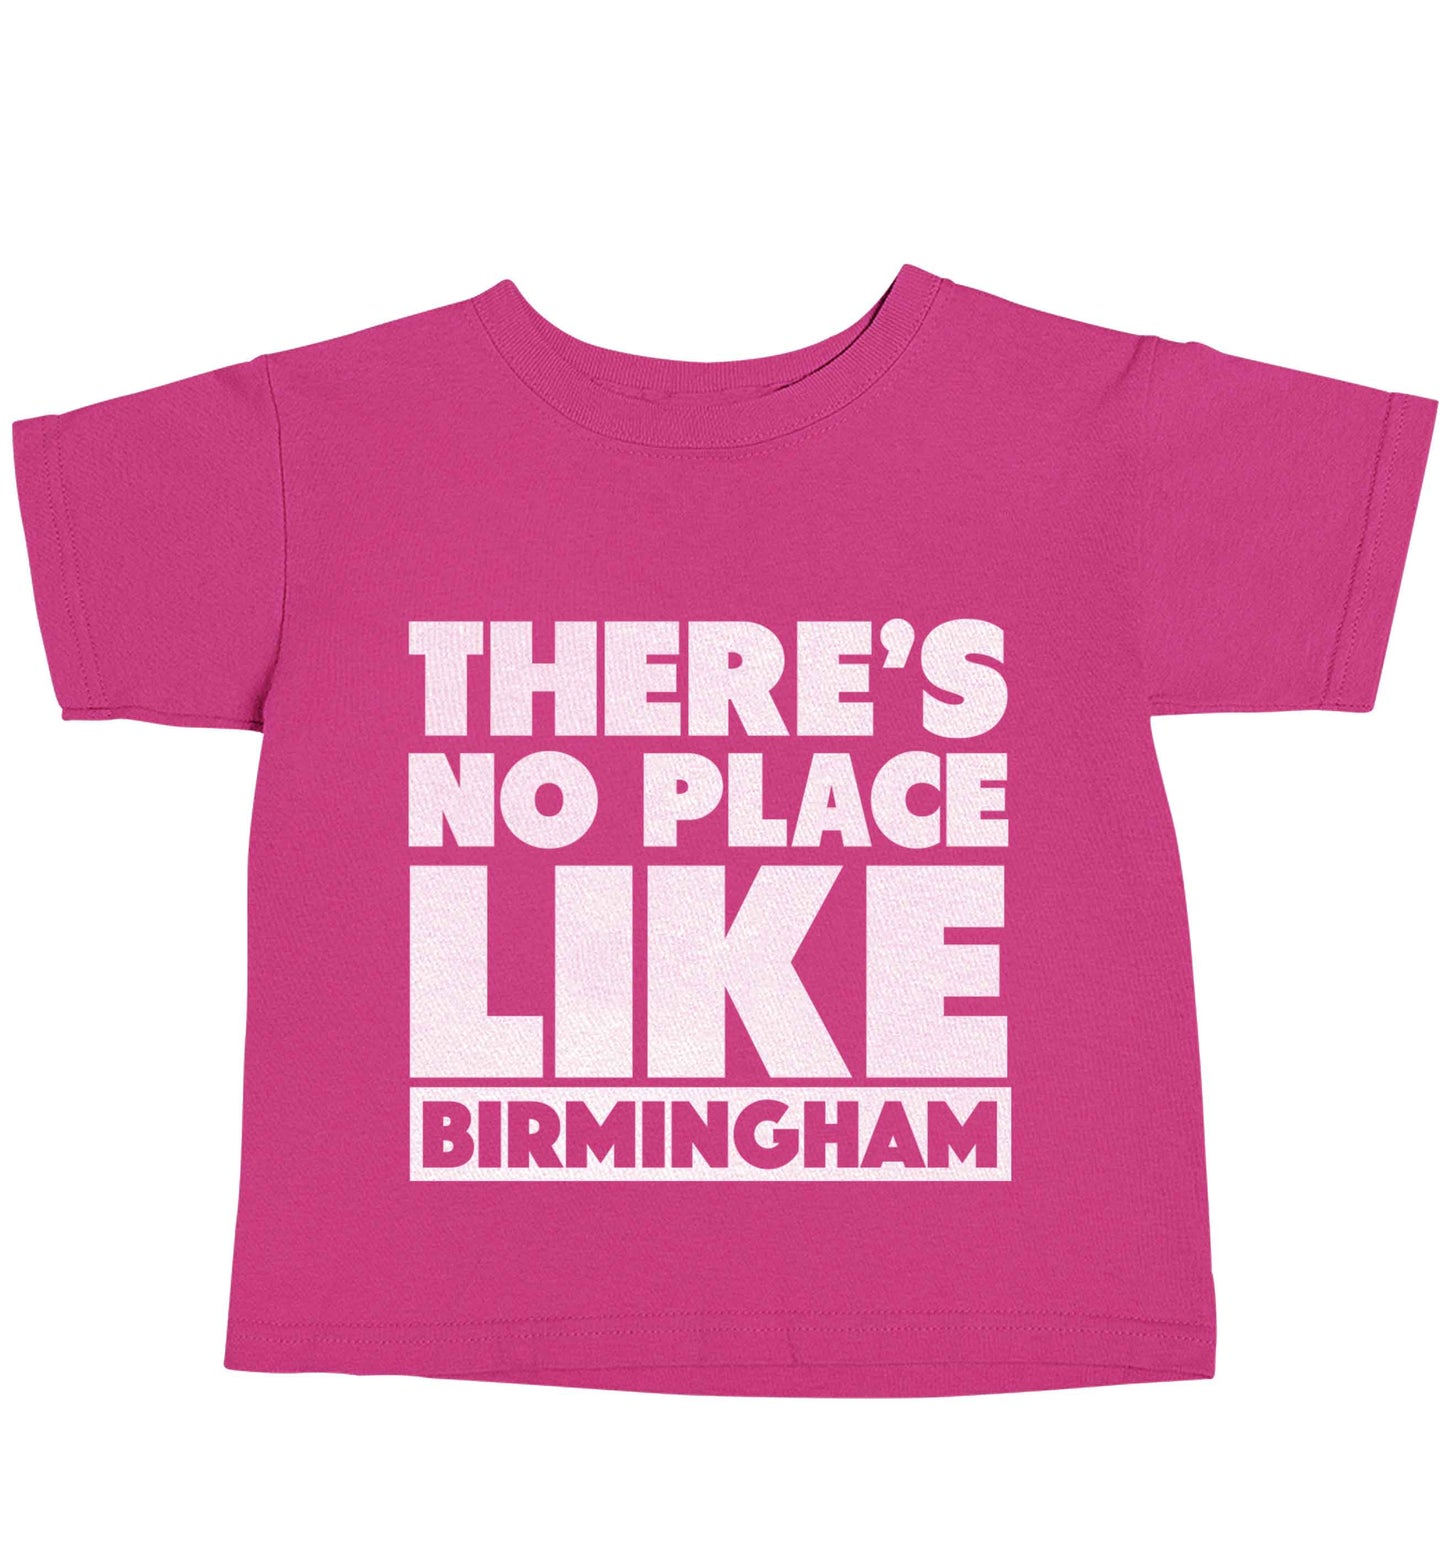 There's no place like Birmingham pink baby toddler Tshirt 2 Years